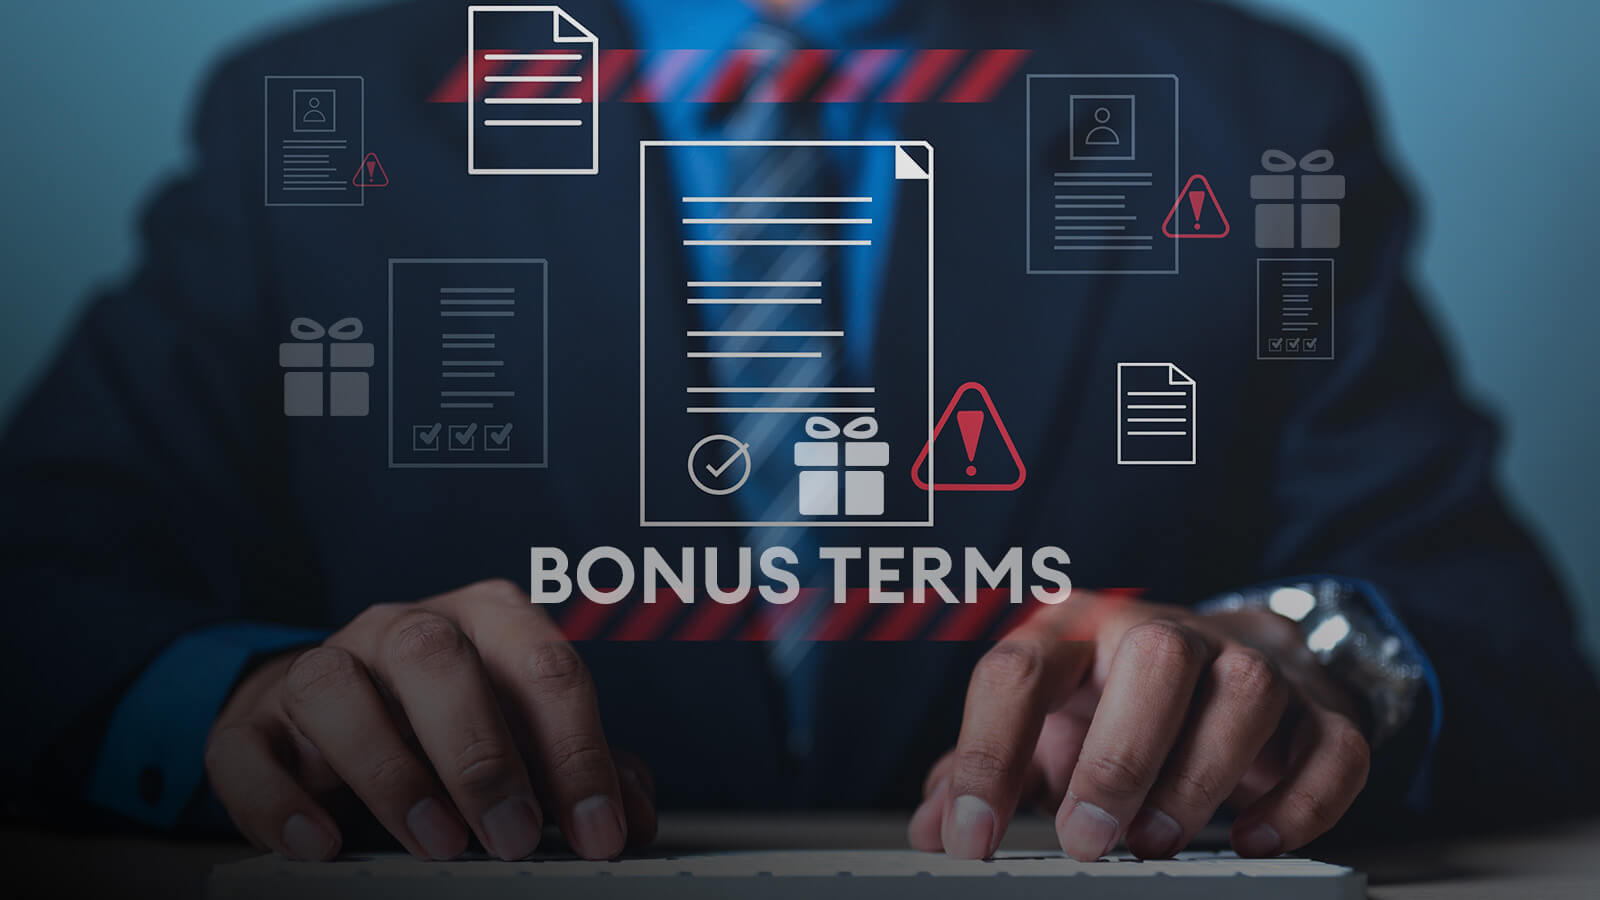 Pay Attention to the Bonus Terms